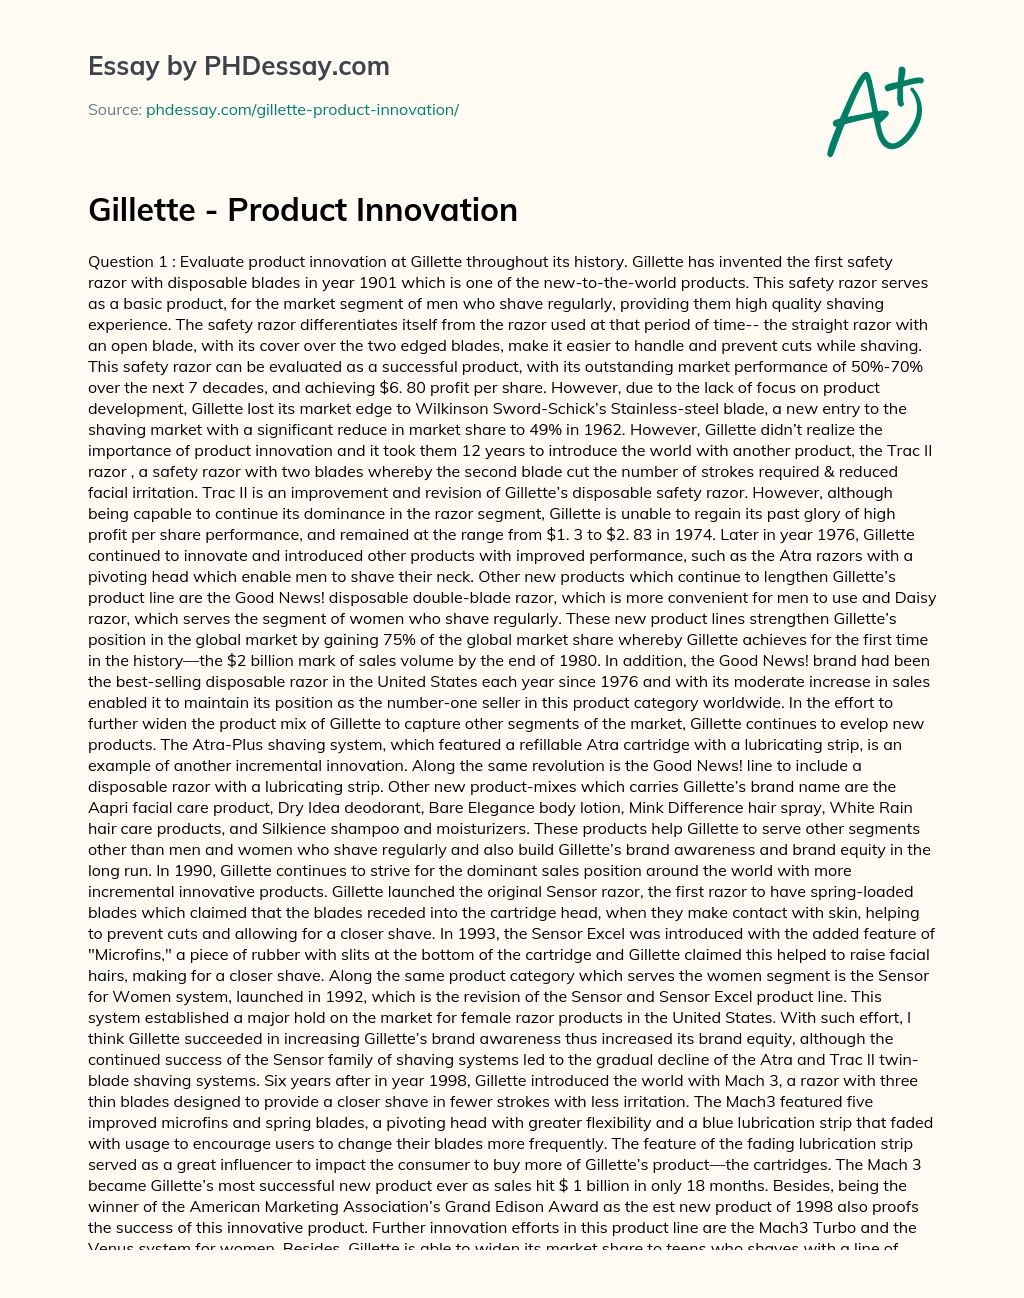 Product Innovations at Gillette essay